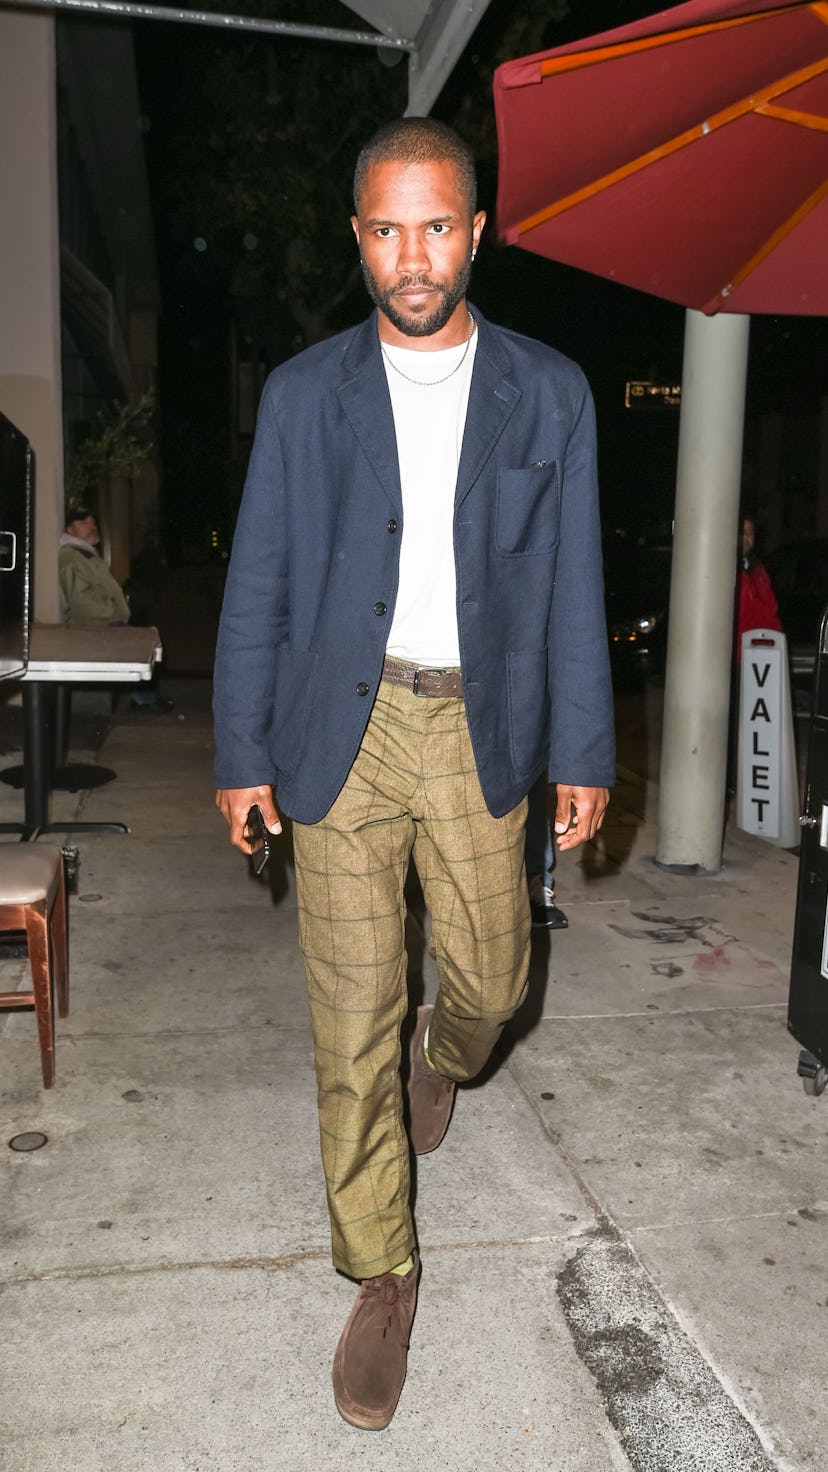 LOS ANGELES, CA - MAY 31: Frank Ocean is seen on May 31, 2019 in Los Angeles, California.  (Photo by...